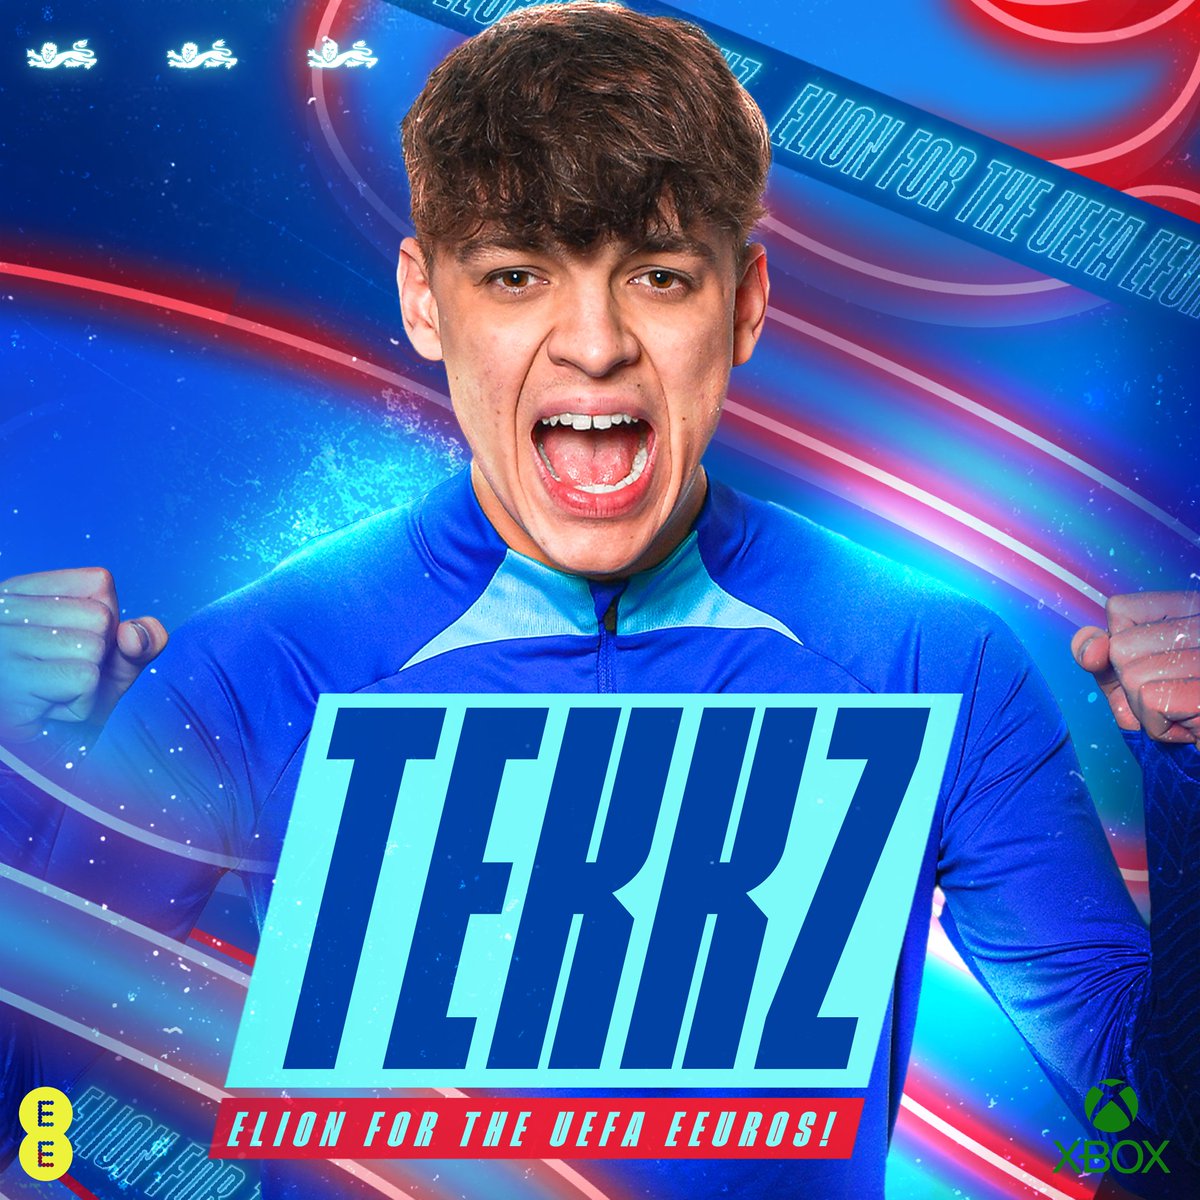 Now that Gareth is done, it's our turn to have some fun... We are pleased to confirm that @Tekkz has been chosen to represent @England in the @UEFA eEuros qualifiers this weekend! 🤩 #EnglandGaming